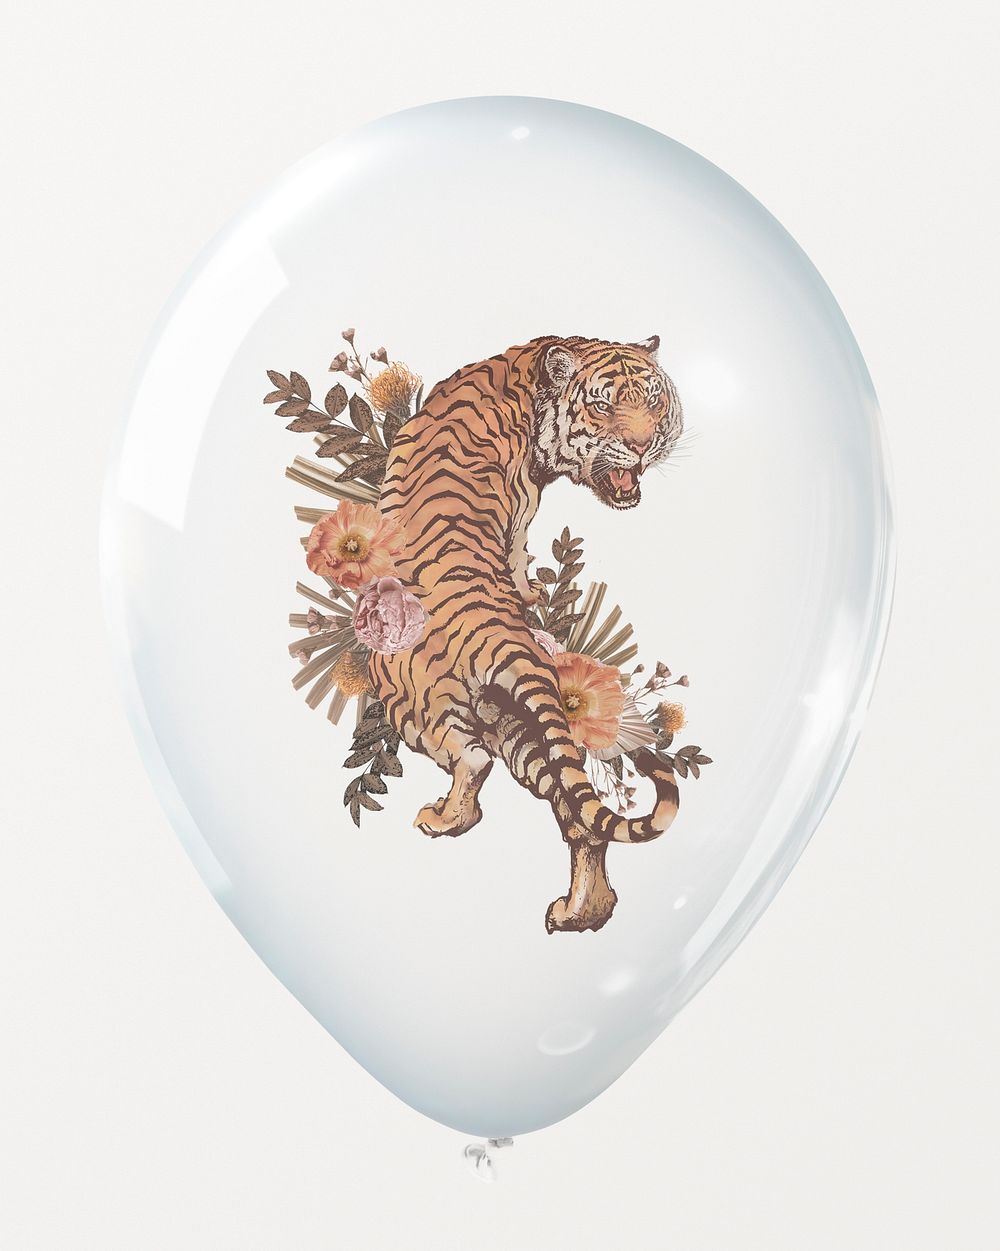 Roaring tiger in clear balloon, wildlife protection